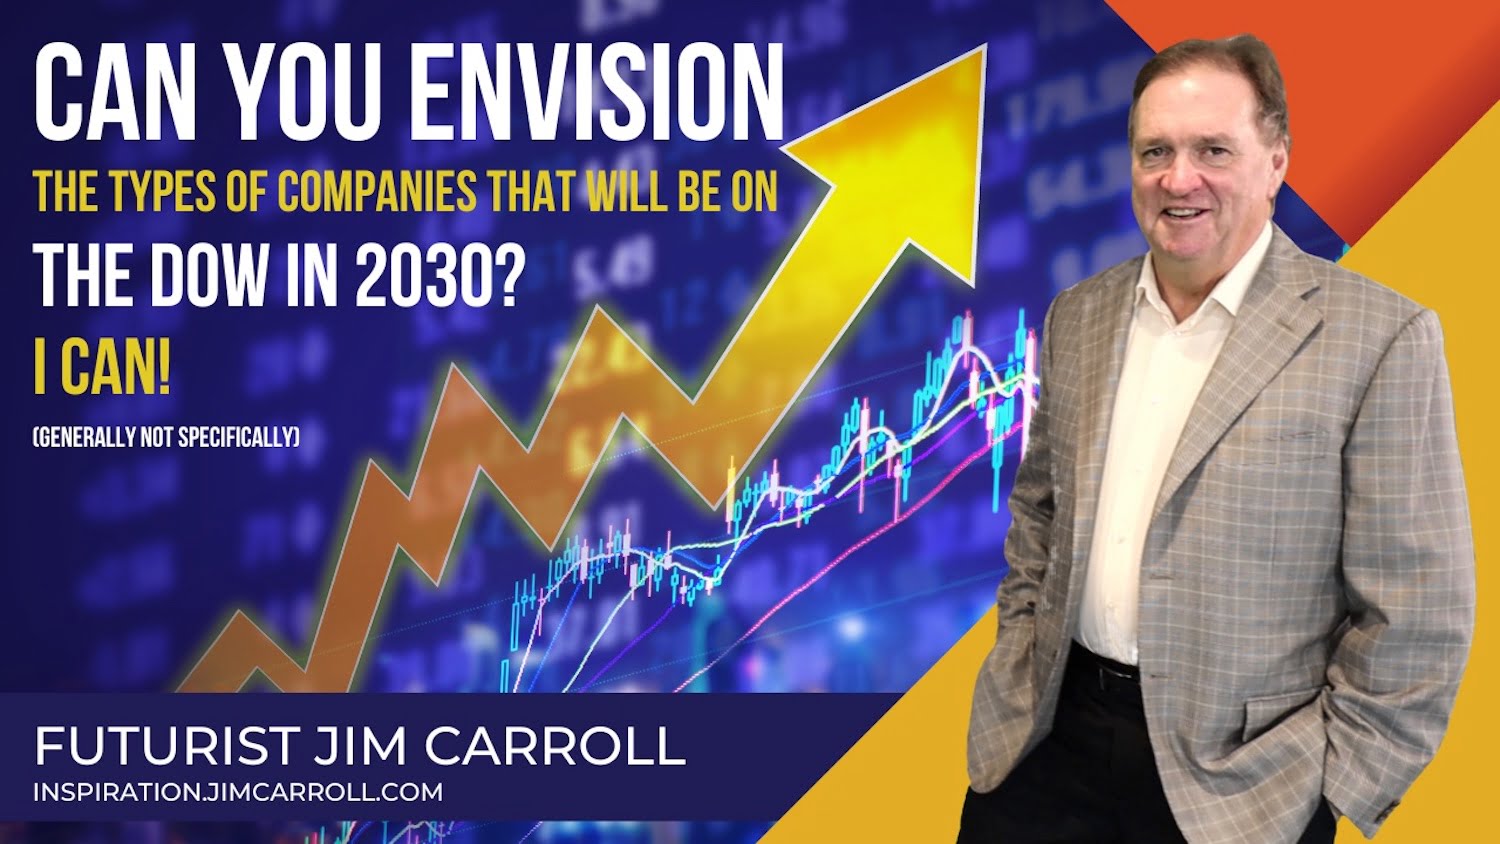 Daily Inspiration: "Can you envision the types of companies that will be on the Dow in 2030?"